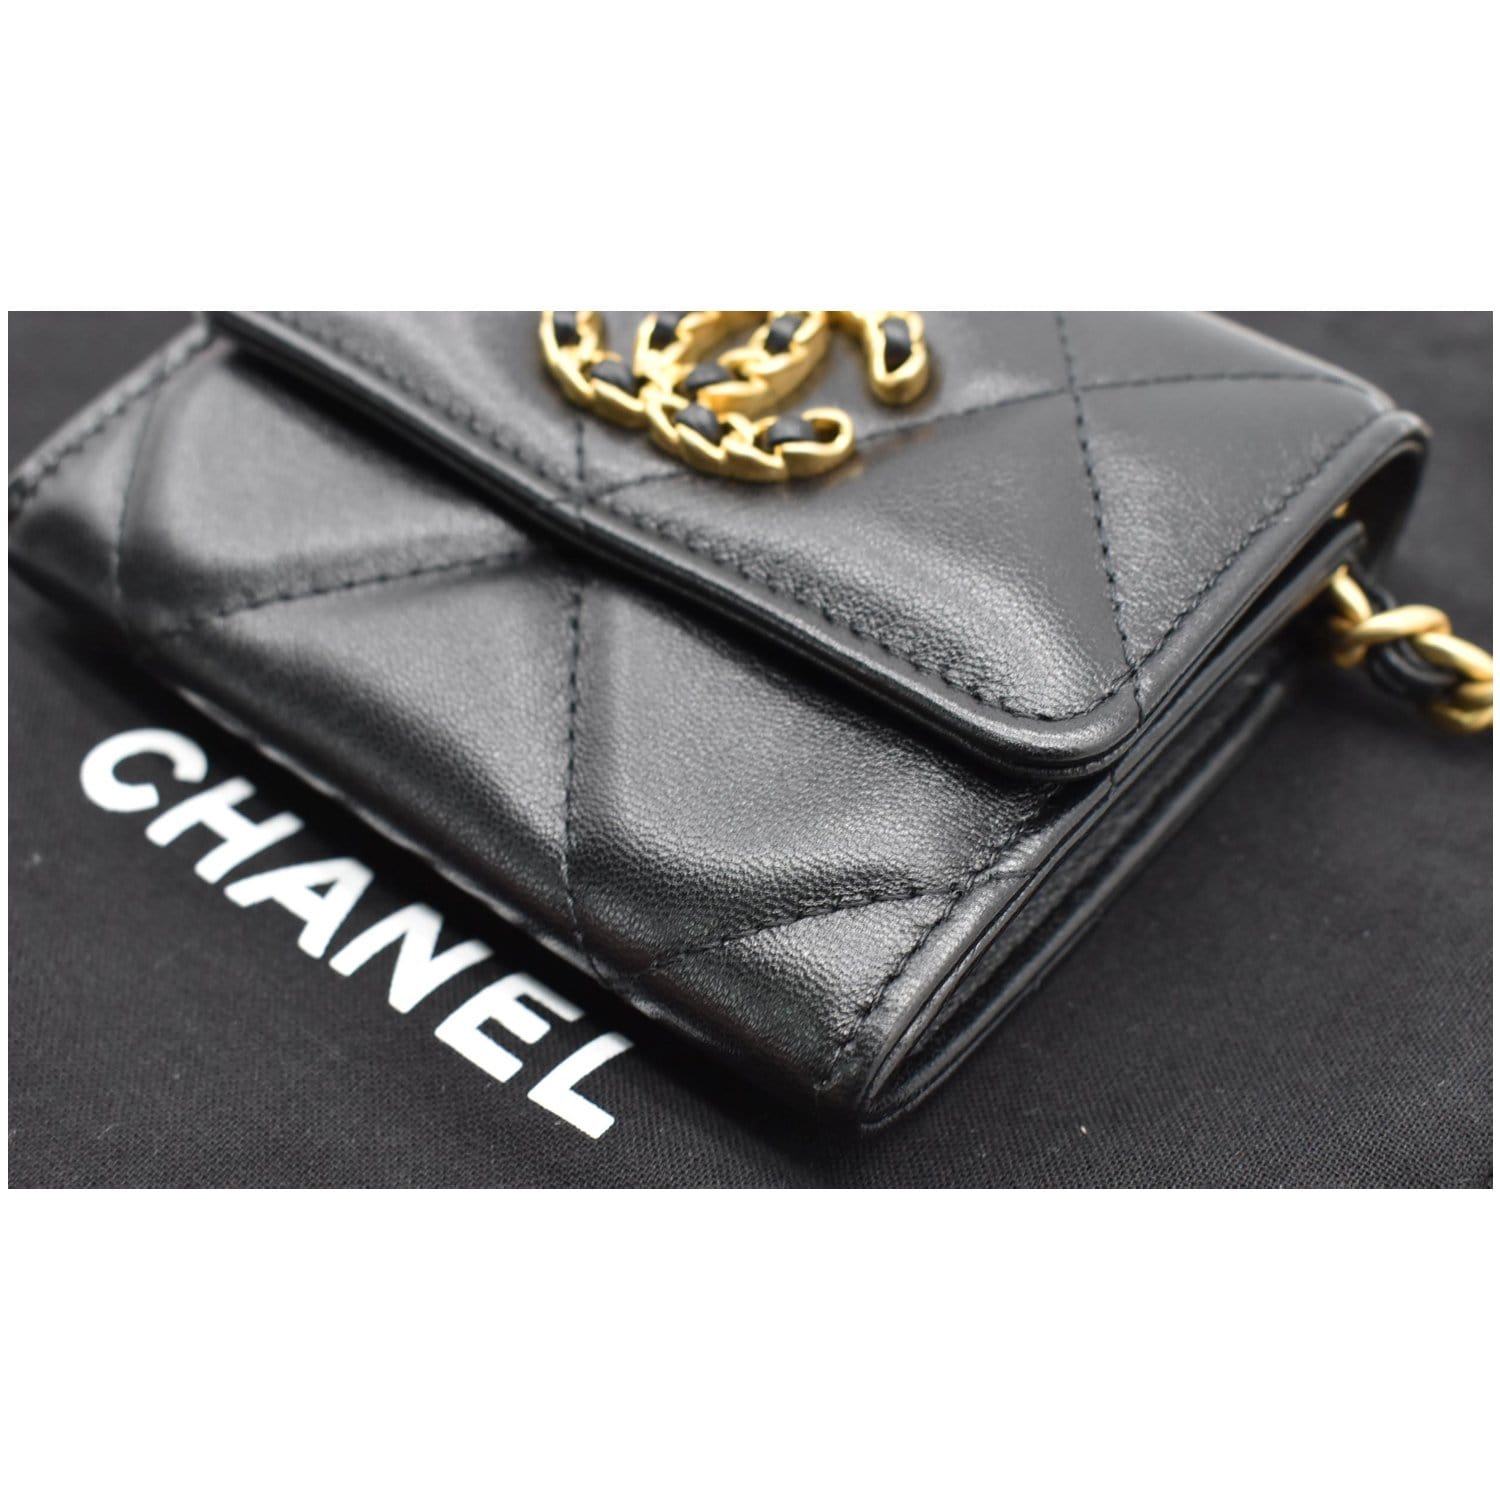 Chanel 19 Flap Coin Purse With Chain Lambskin Black